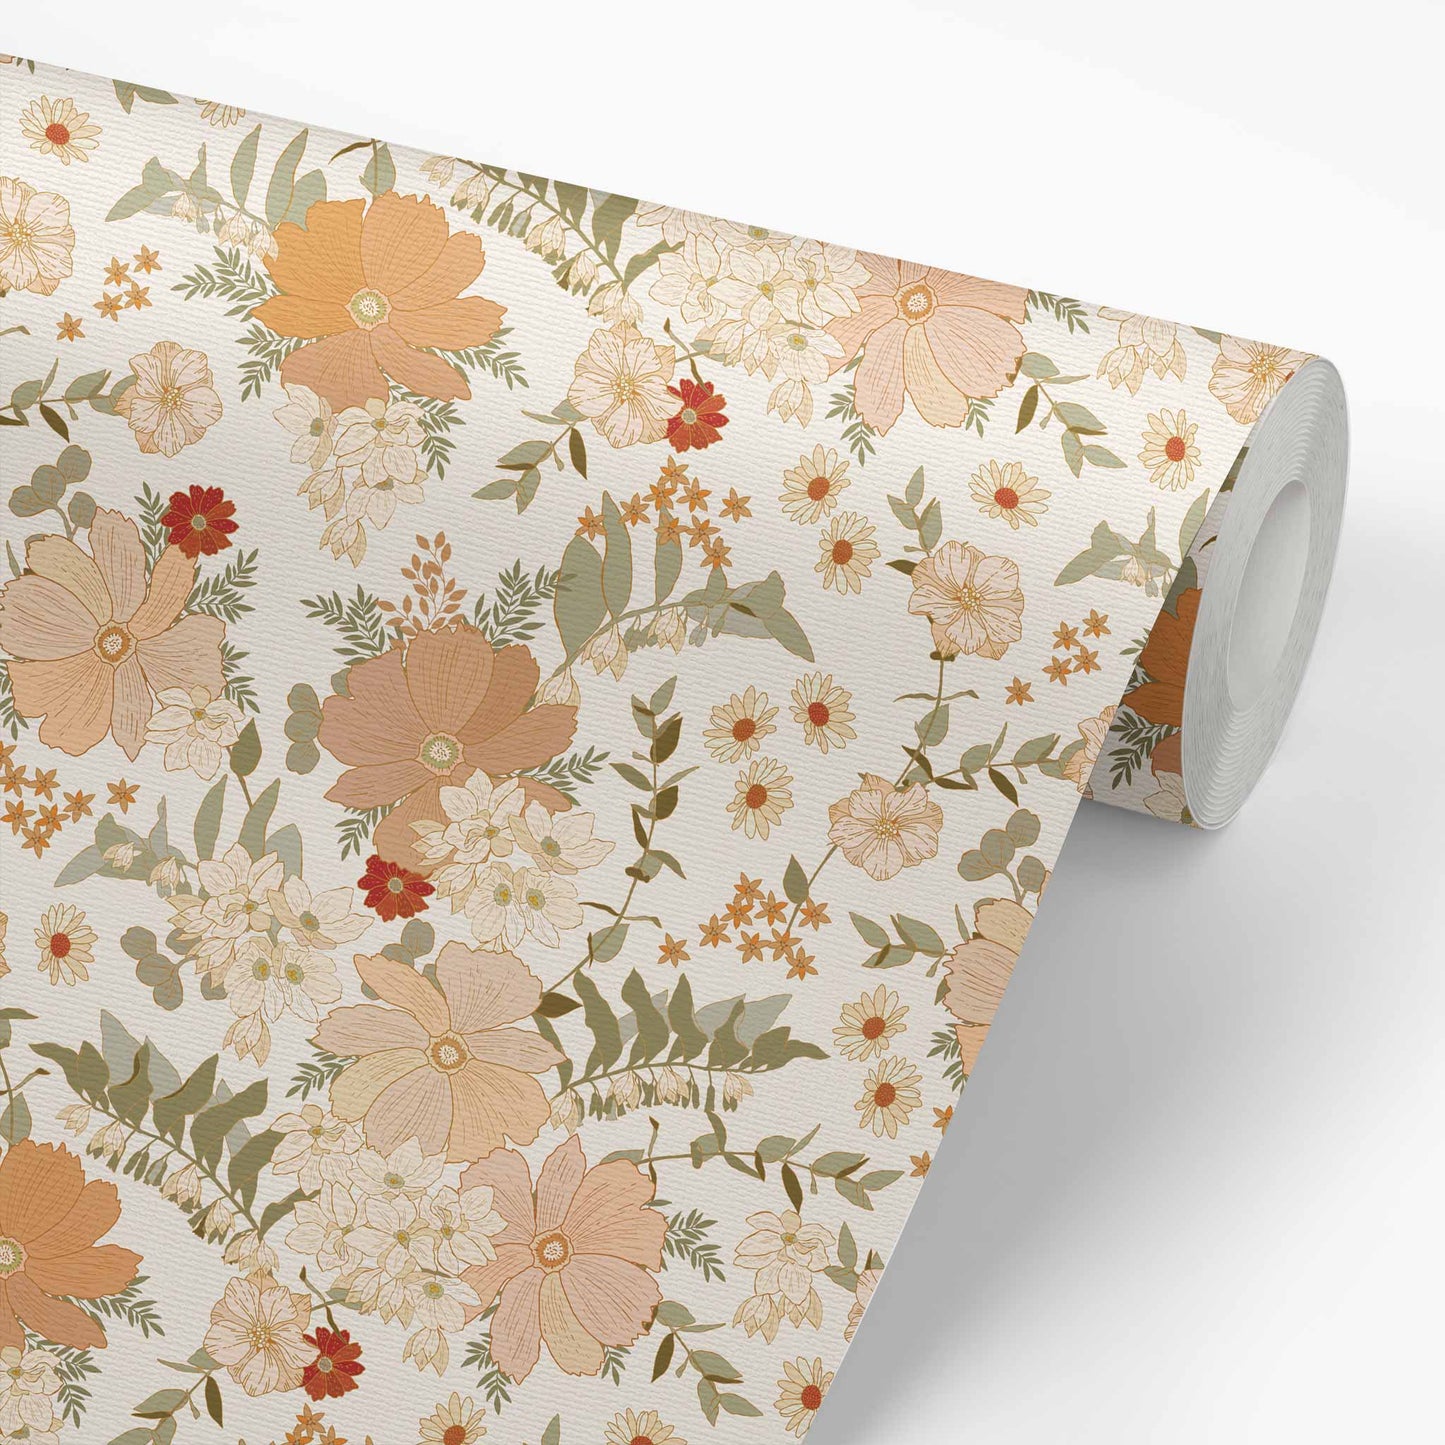 Our Spring Florals Wallpaper is a statement-making solution, featuring elegant flowers to add a touch of springtime beauty to your home.